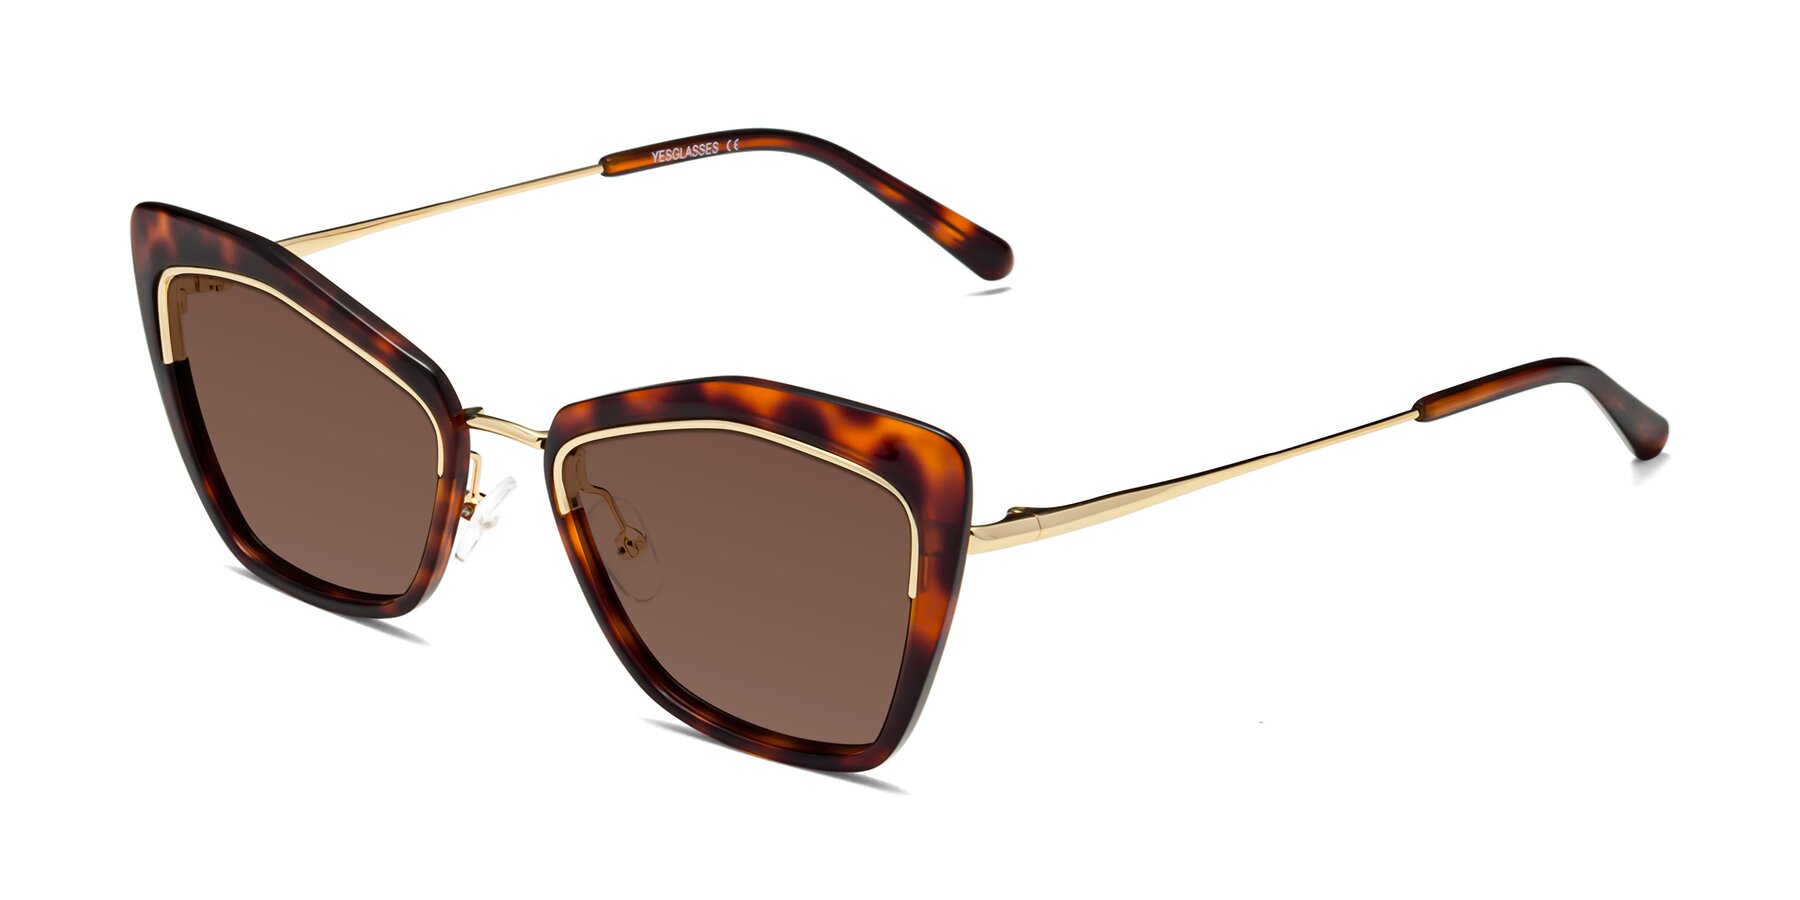 Angle of Lasso in Light Tortoise with Brown Tinted Lenses